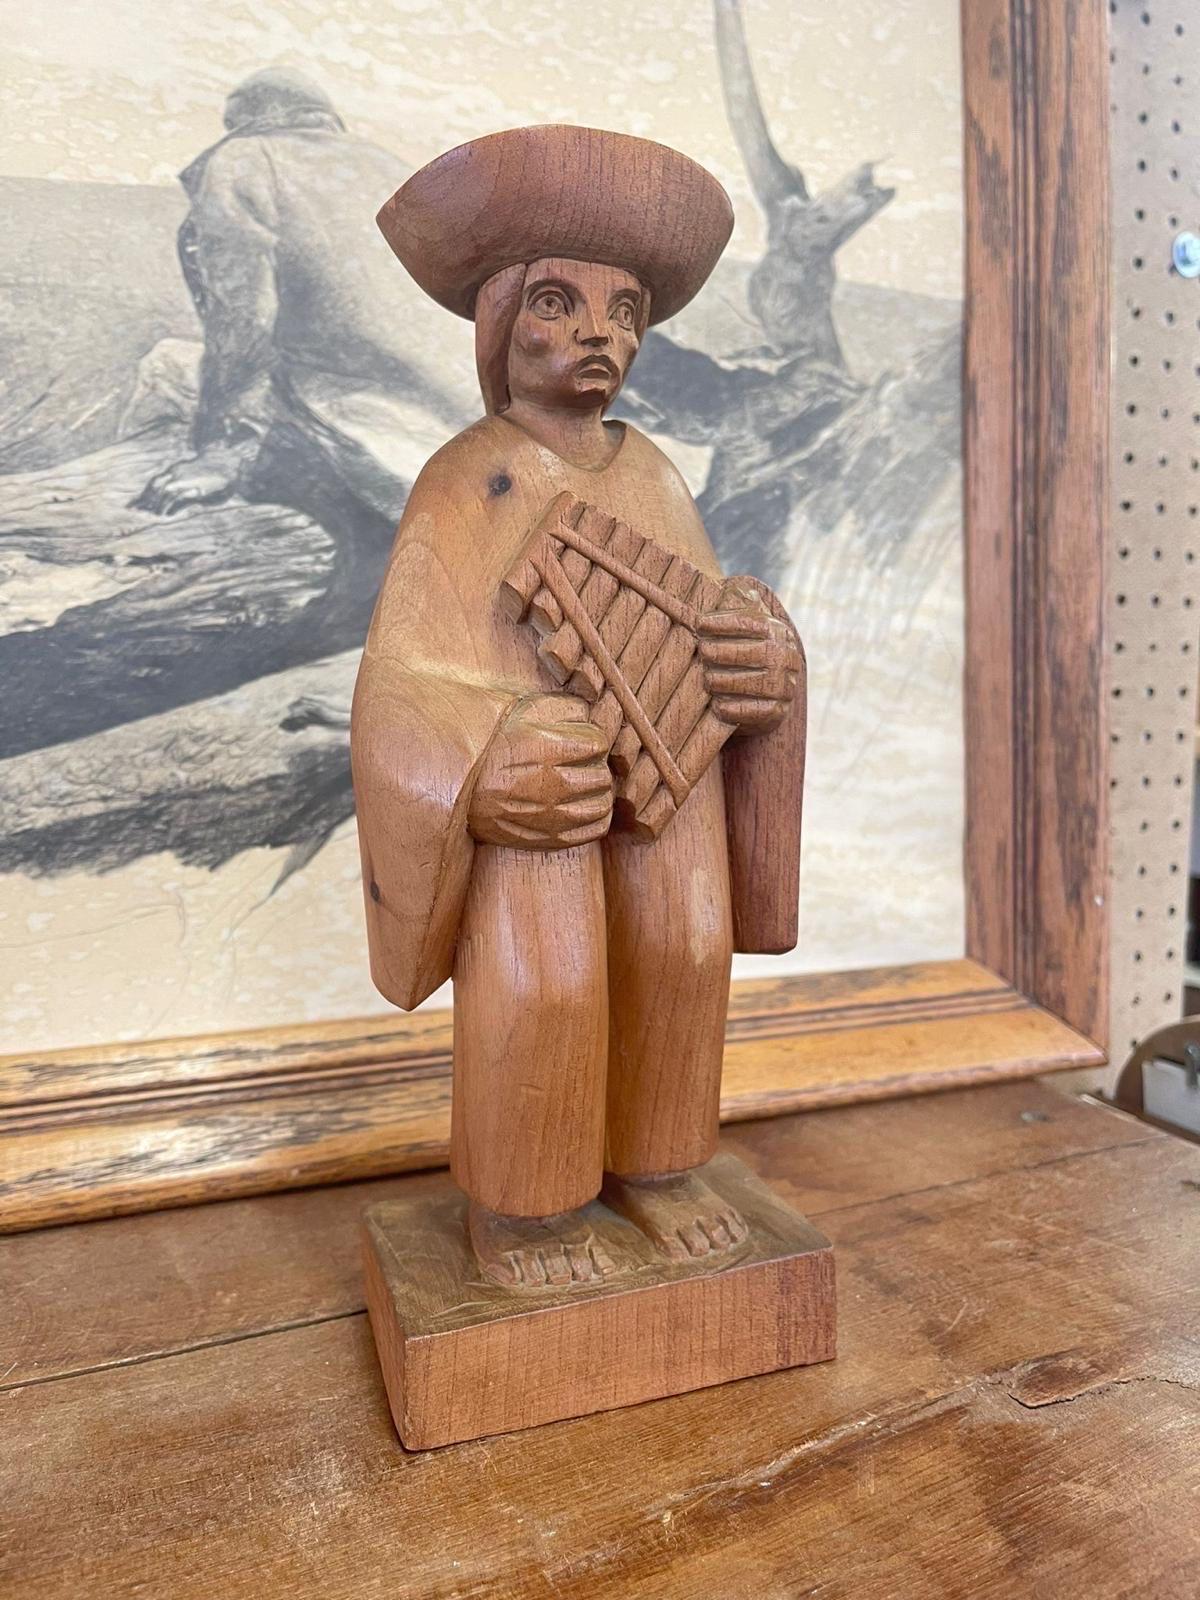 This wooden figure was hand made in Ecuador. Depicts a person carrying a flute. Beautiful wood grain with exaggerated features. Vintage Condition Consistent with Age as Pictured.

Dimensions. 5 W ; 3 D ; 12 H